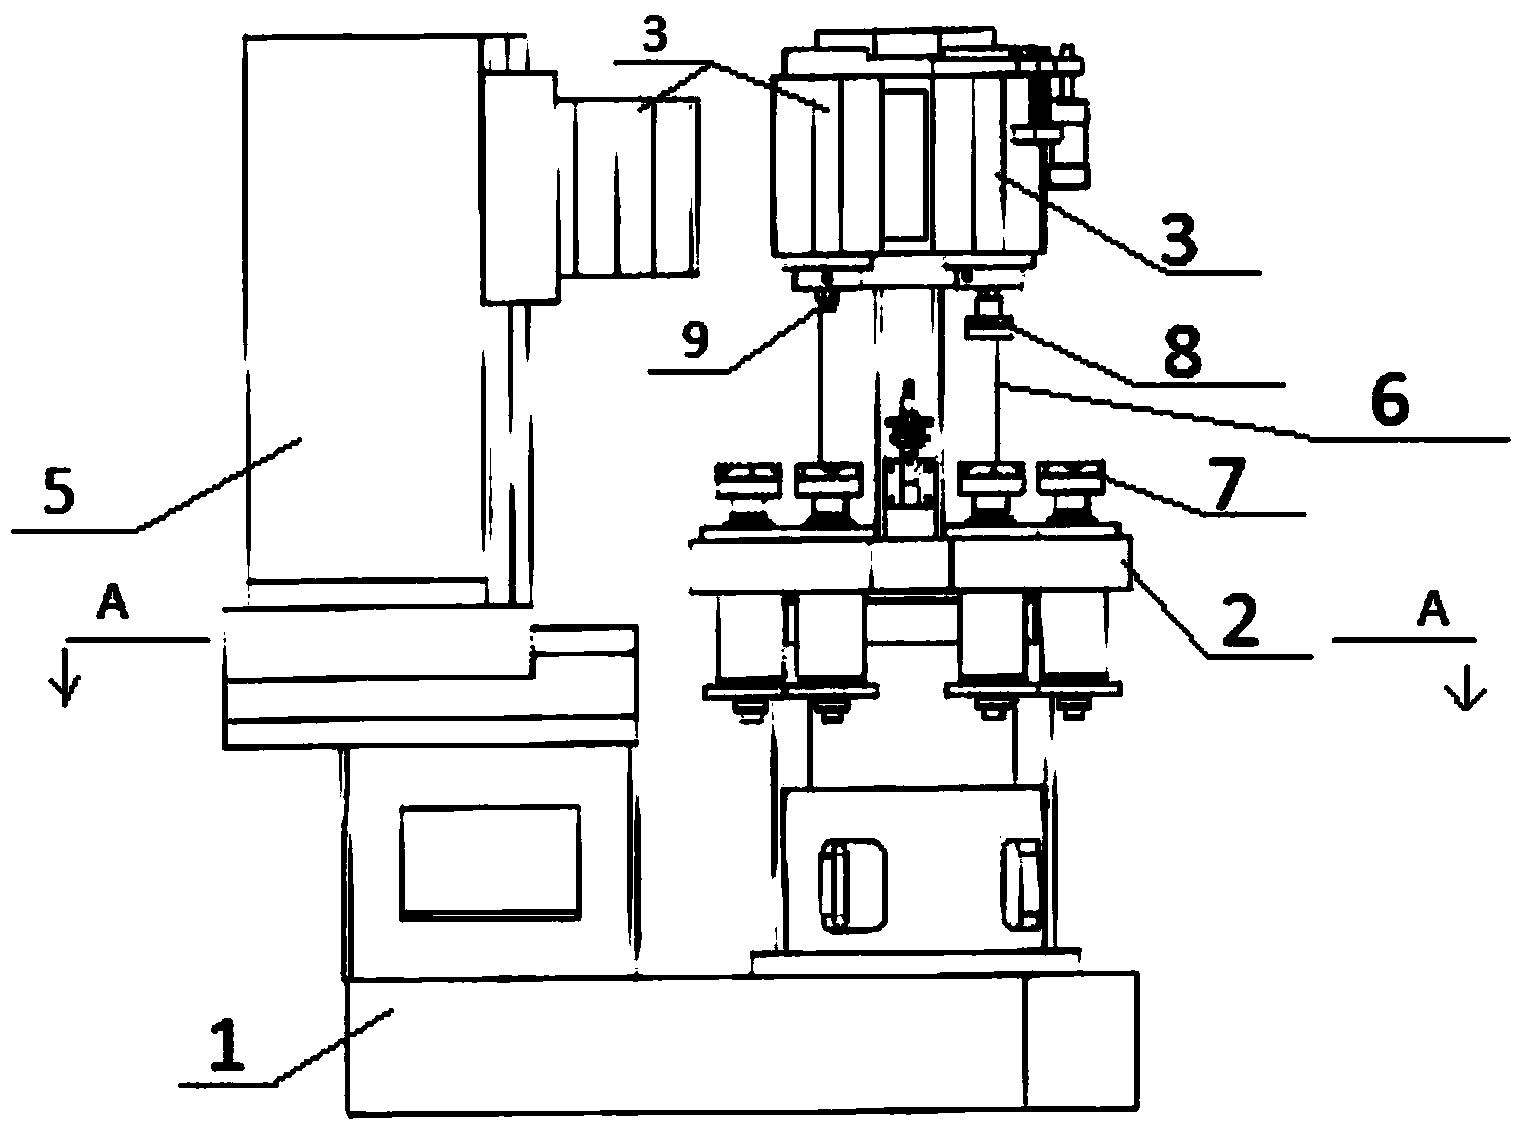 Automatic milling and grinding machine